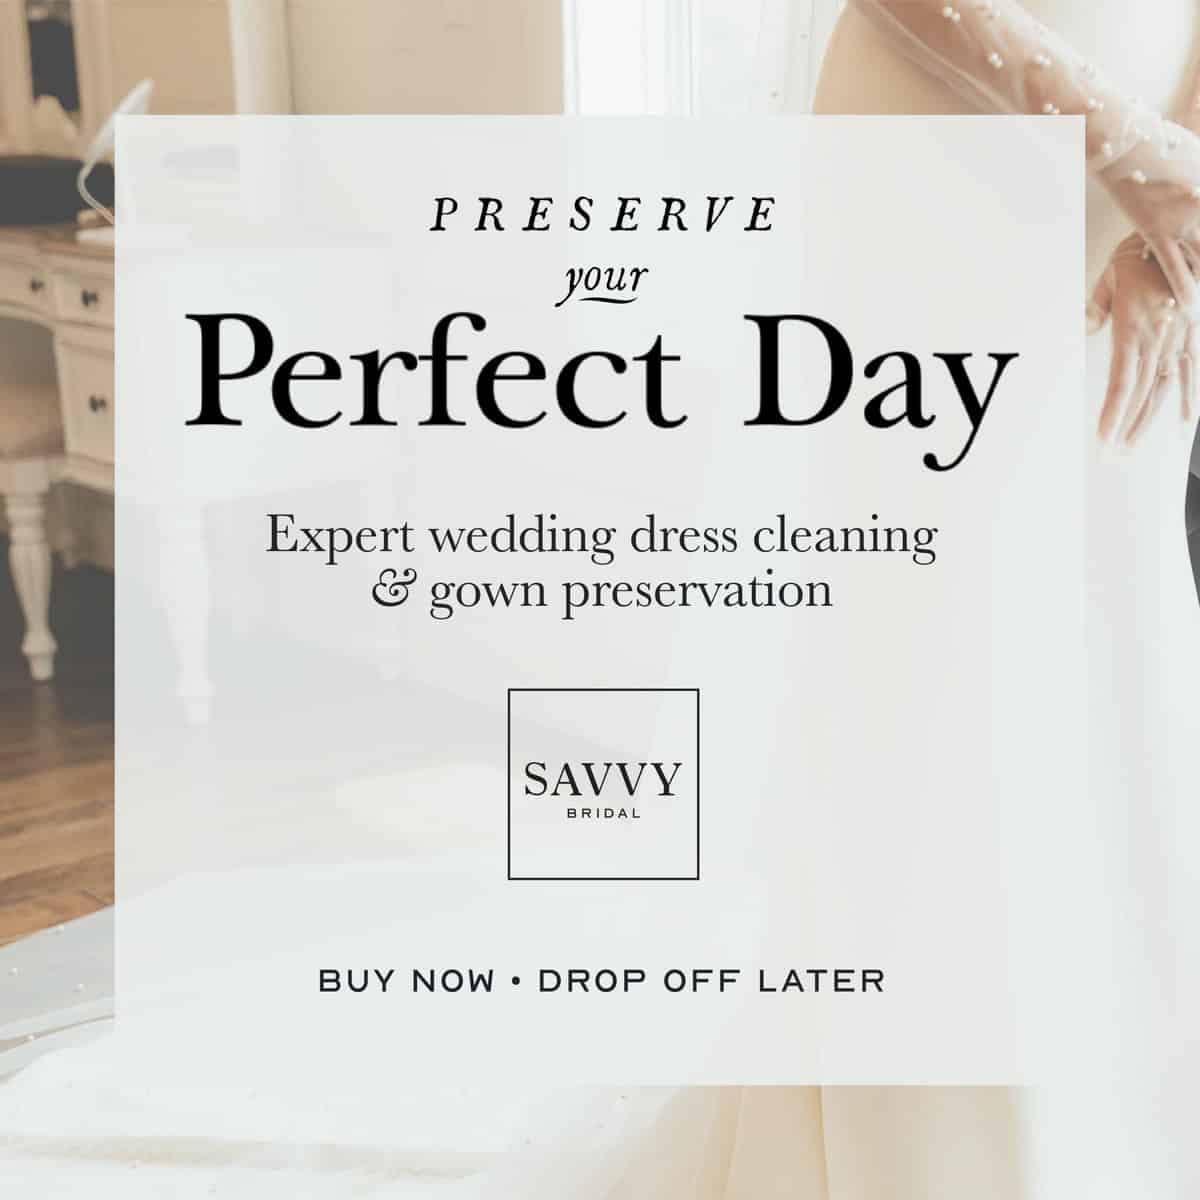 wedding dress cleaning and gown preservation at Savvy Bridal